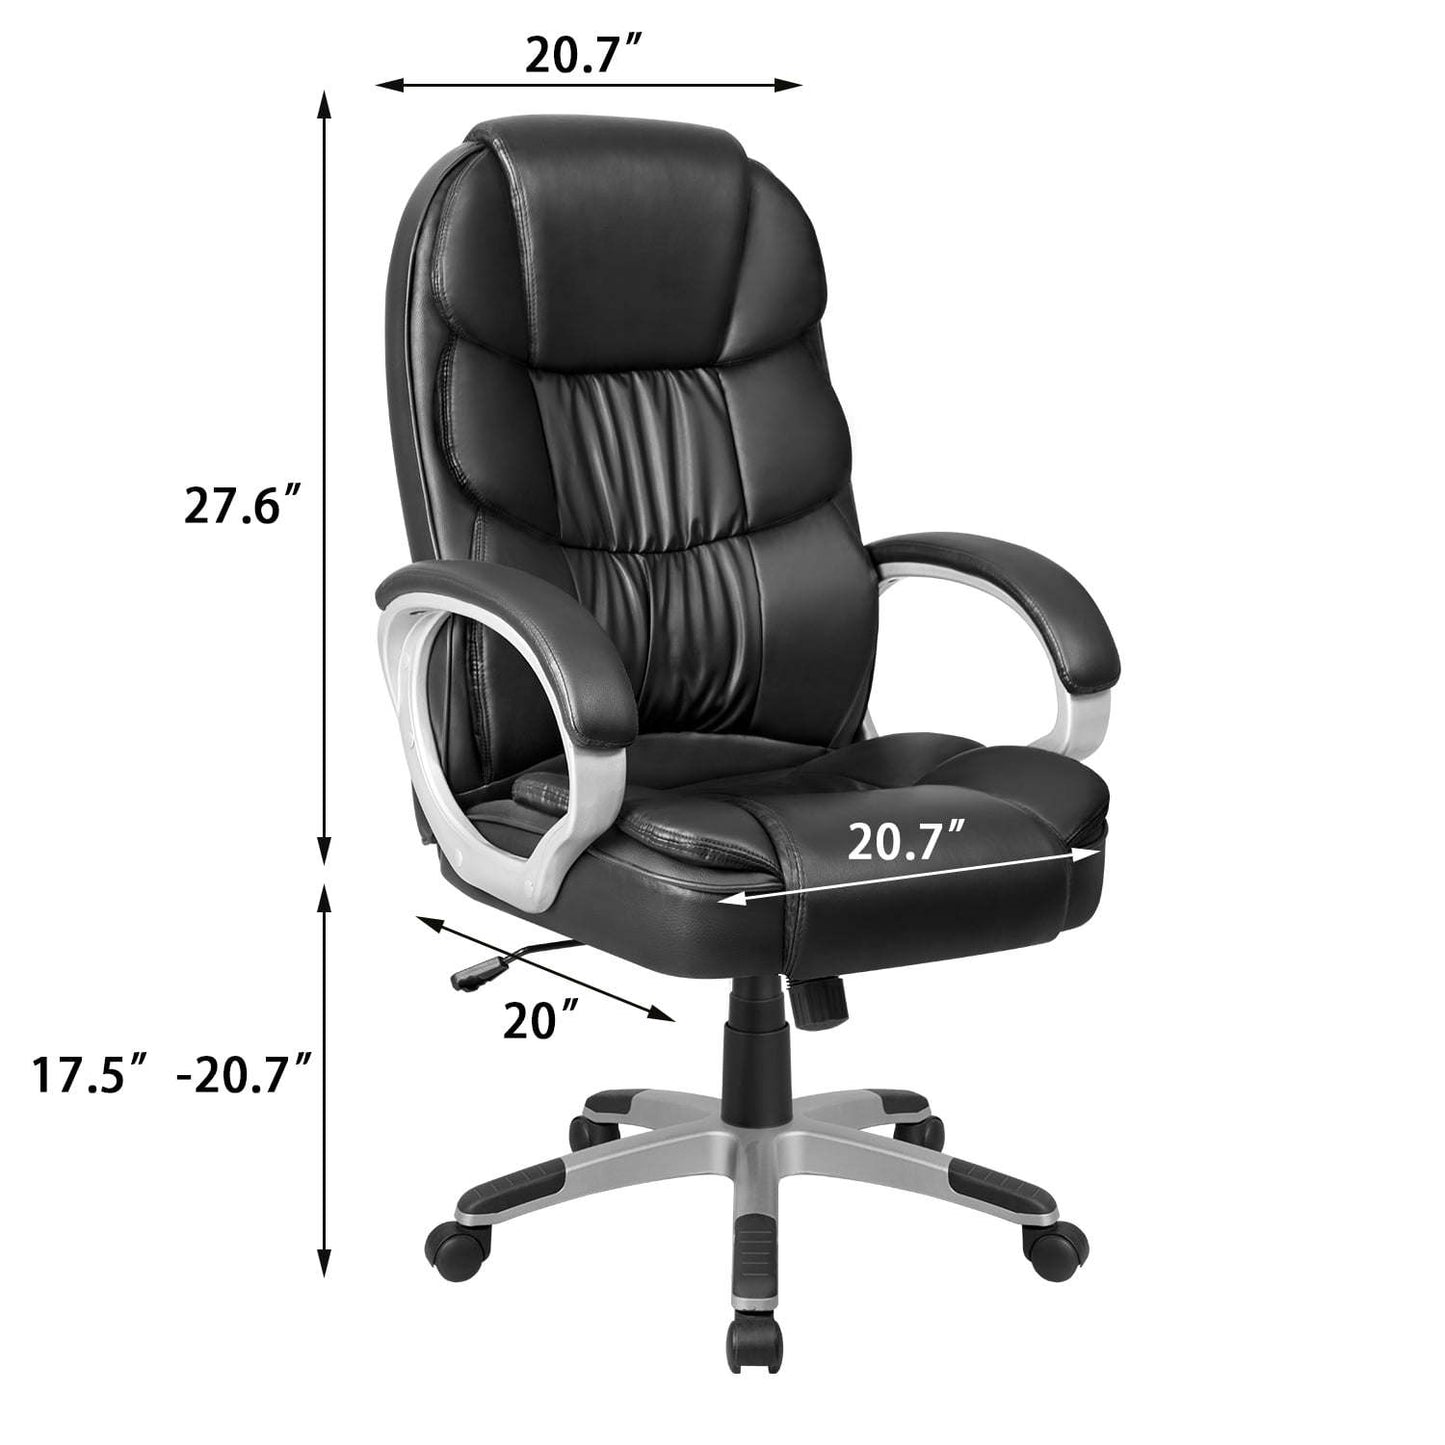 High Back Executive Chair PU Leather Business Manager's Office Chair Adjustable Ergonomic Swivel Desk Chair with Lumbar Support and Armrest, Black